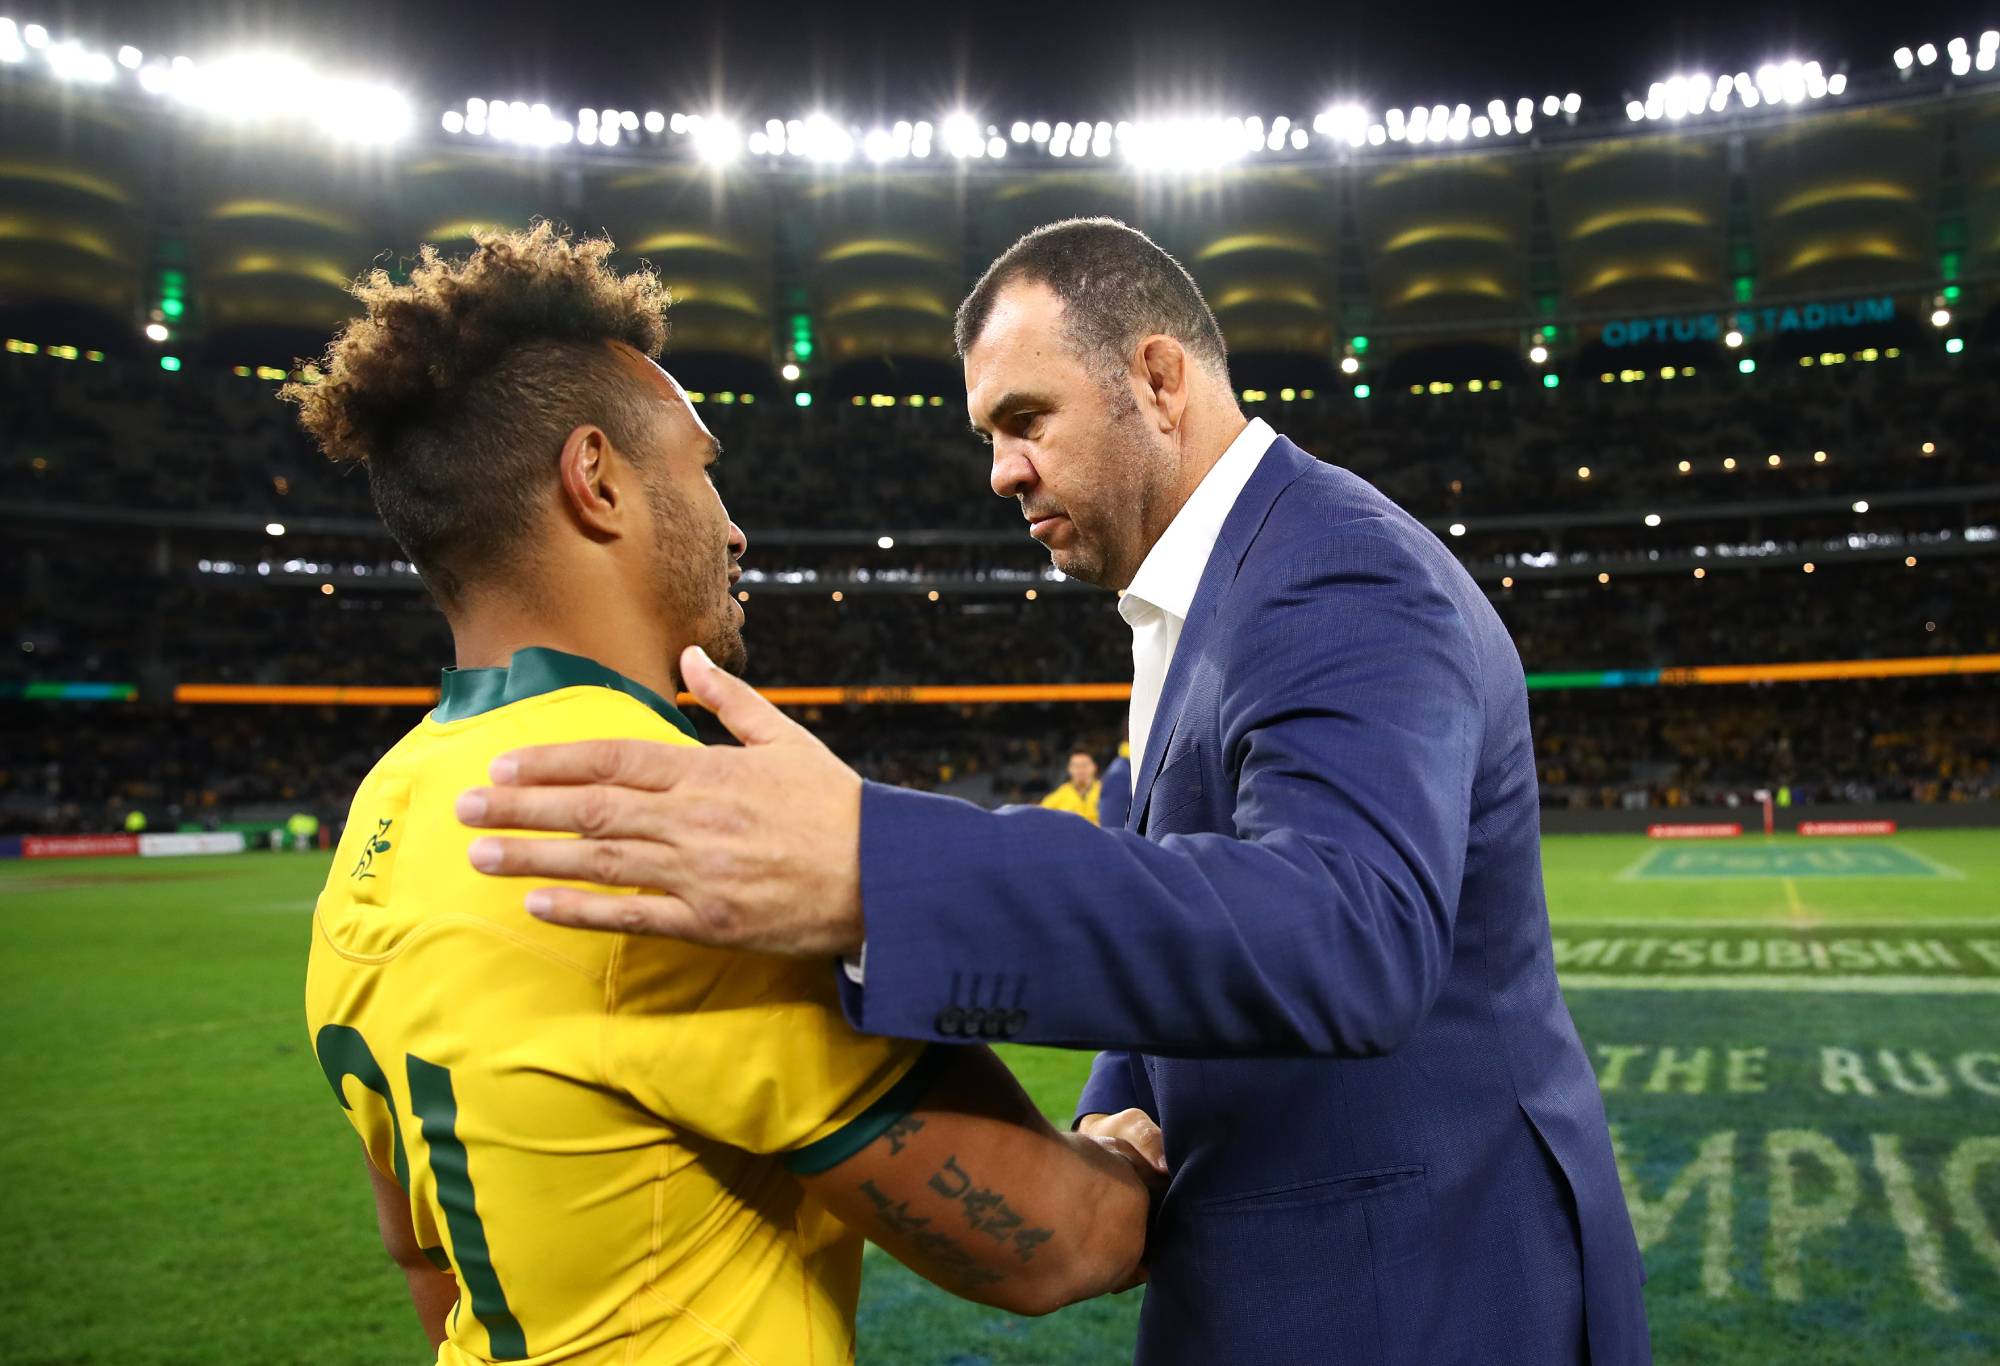 The Wrap: How is it that when the Wallabies lose, support for Dave Rennie goes up?